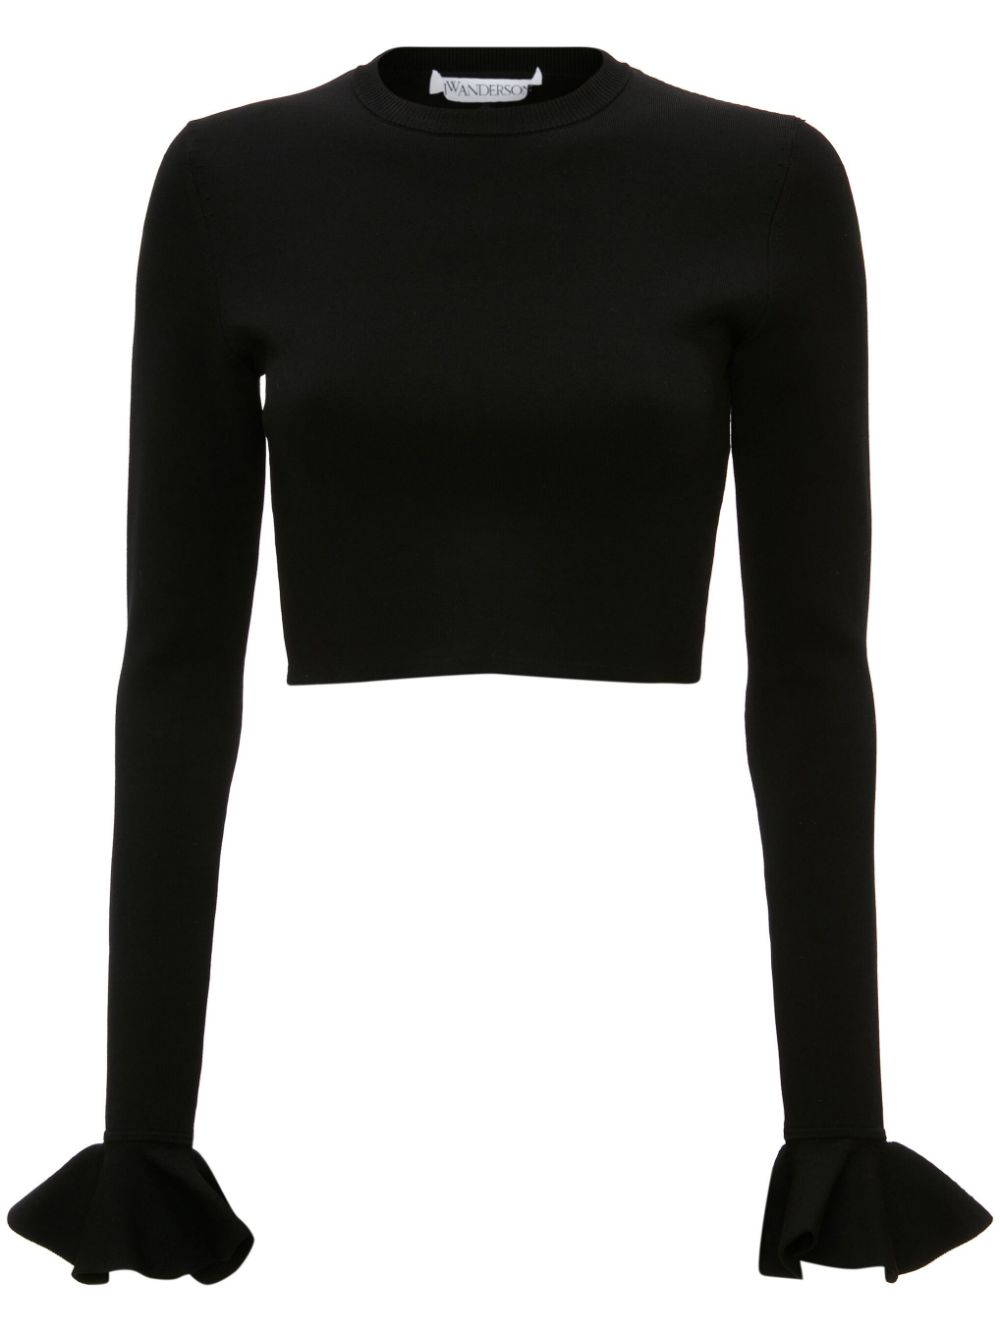 JW Anderson ruffled-cuffs cropped knitted top - Black von JW Anderson